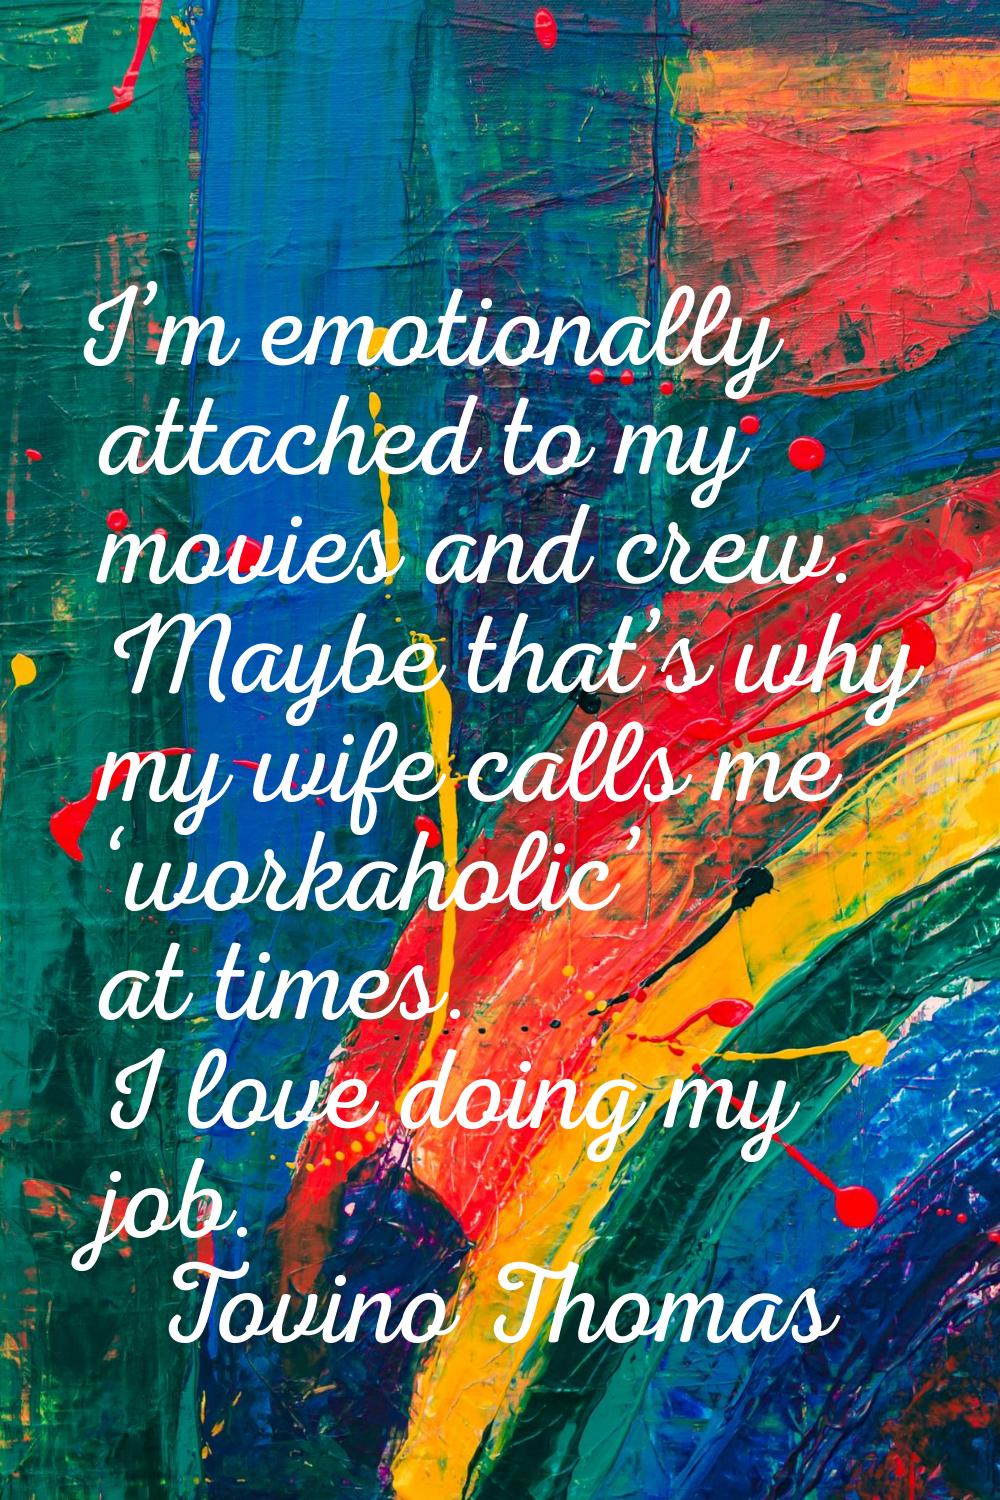 I’m emotionally attached to my movies and crew. Maybe that’s why my wife calls me ‘workaholic’ at t